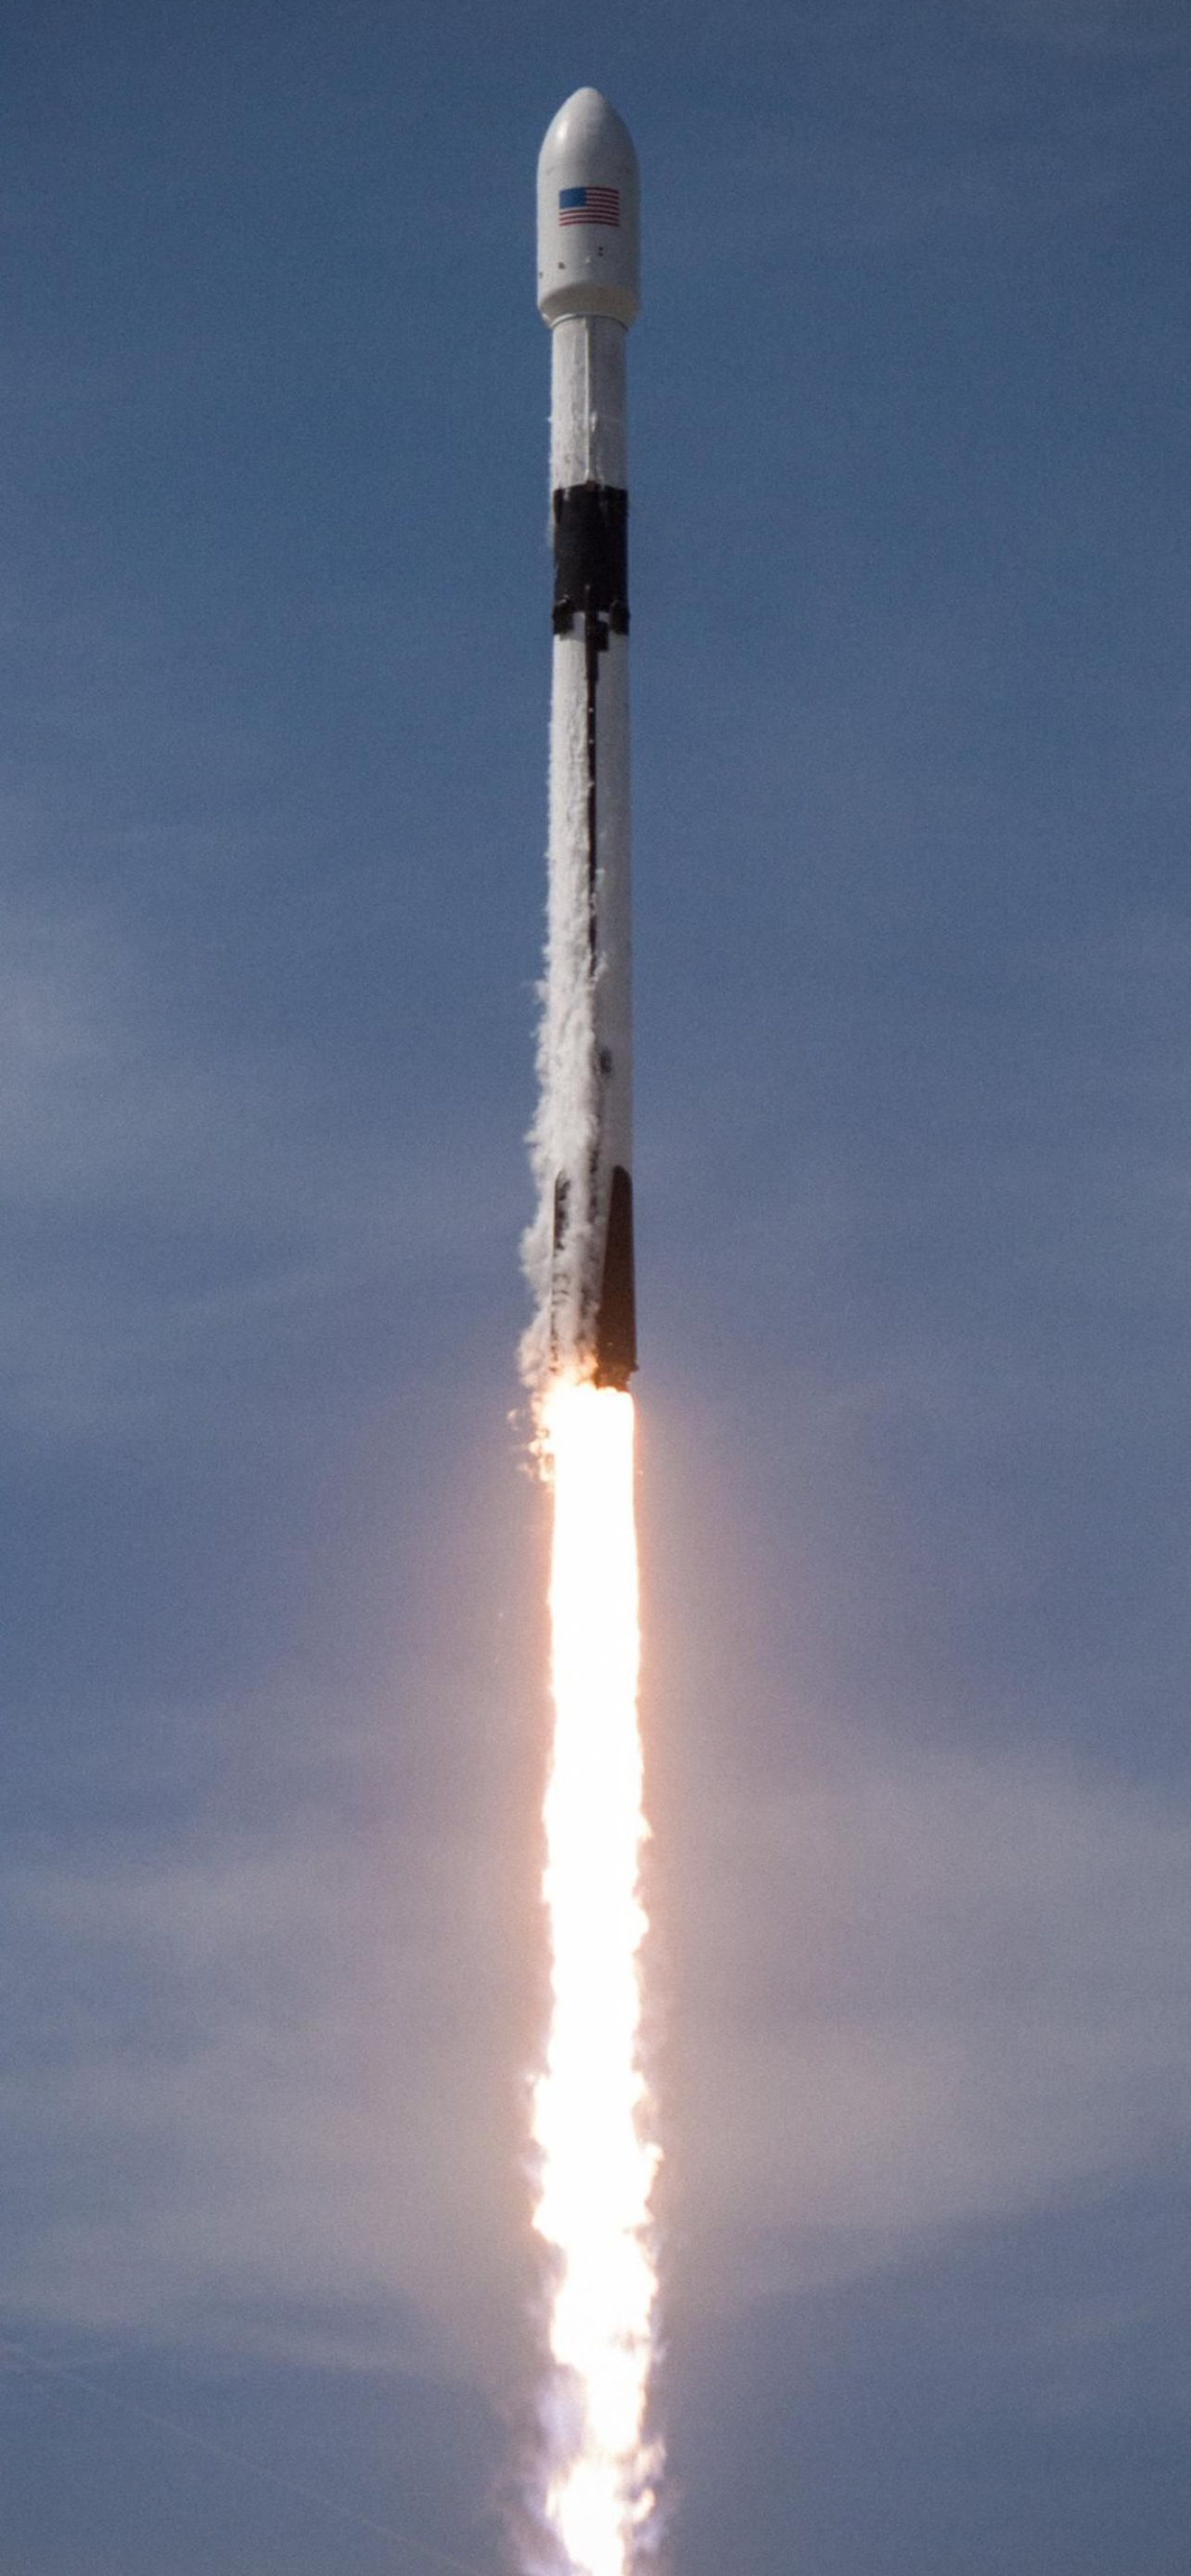 1284x2778 51 SpaceX Falcon 9 Rocket Dragon on afari iPhone Wallpapers Free Download